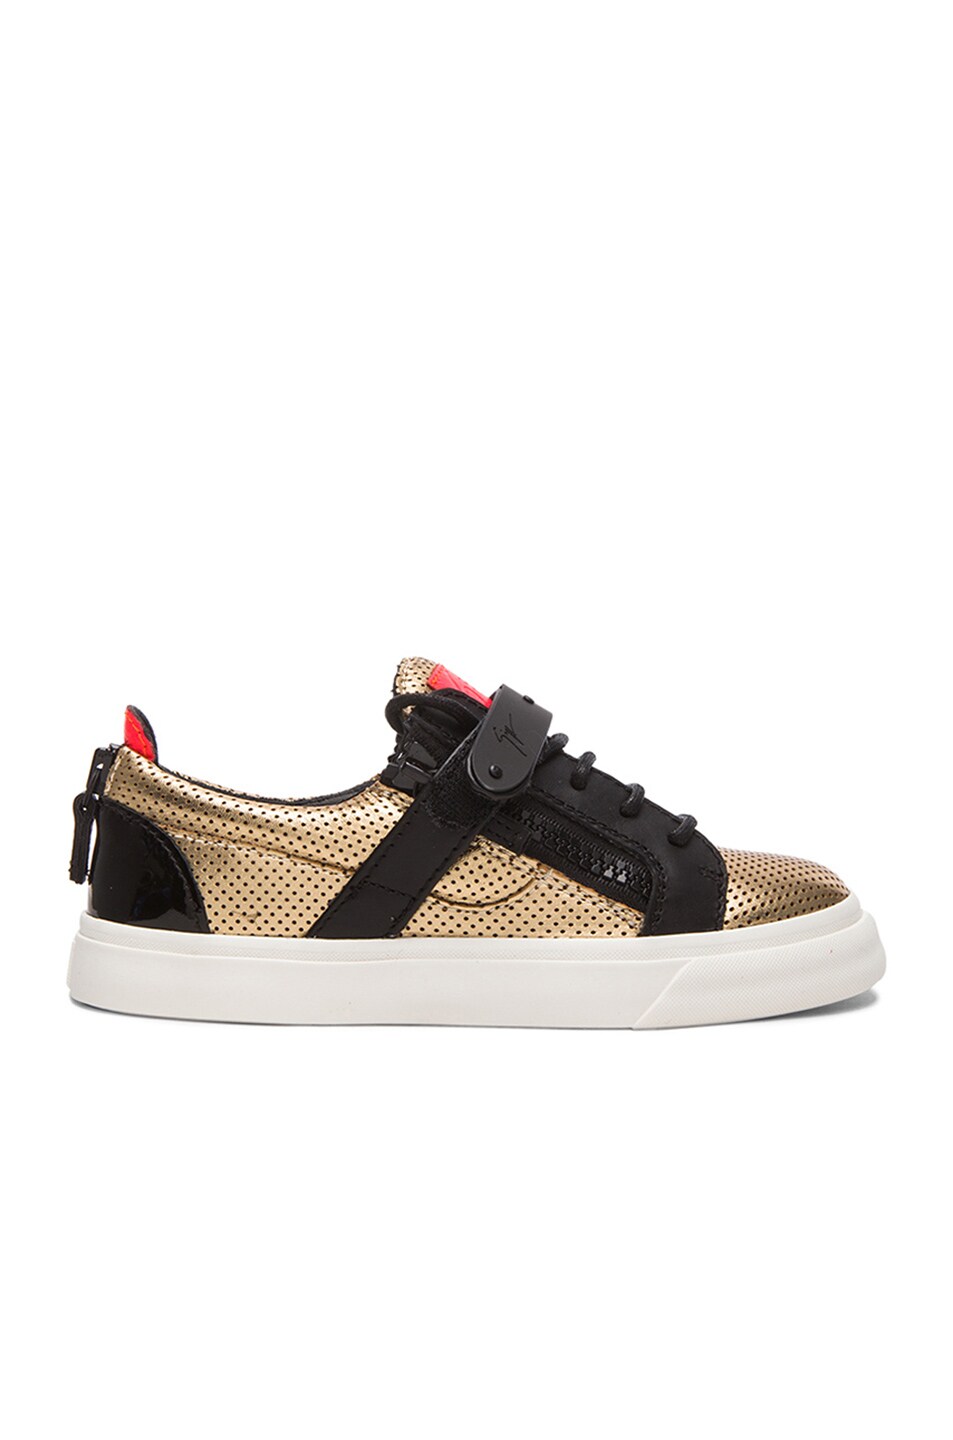 Image 1 of Giuseppe Zanotti Perforated Leather Sneakers in Black & Gold